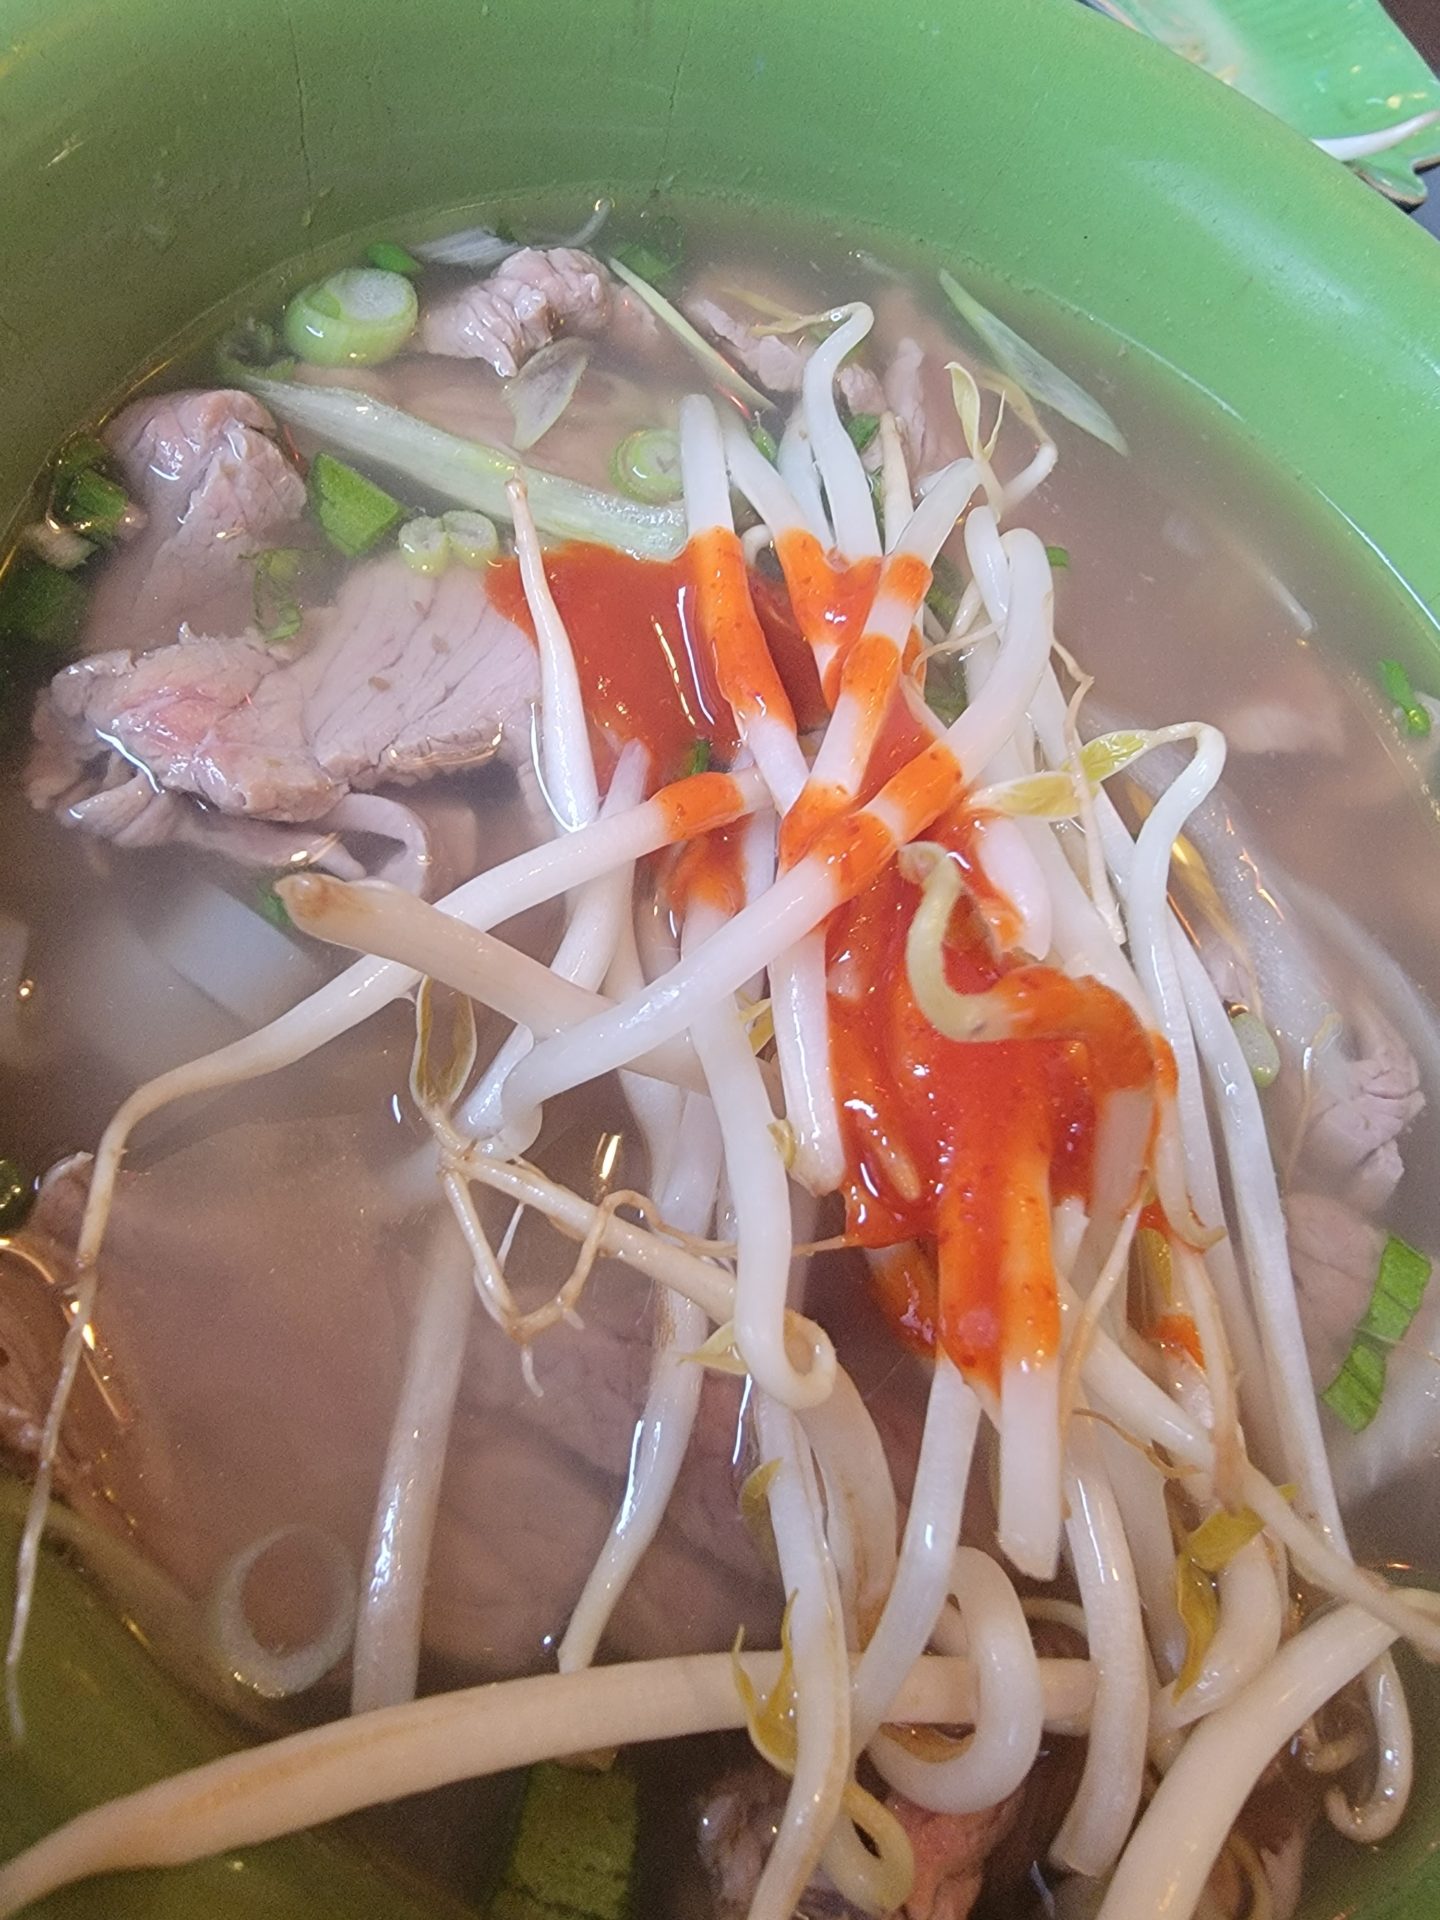 a bowl of soup with meat and sprouts